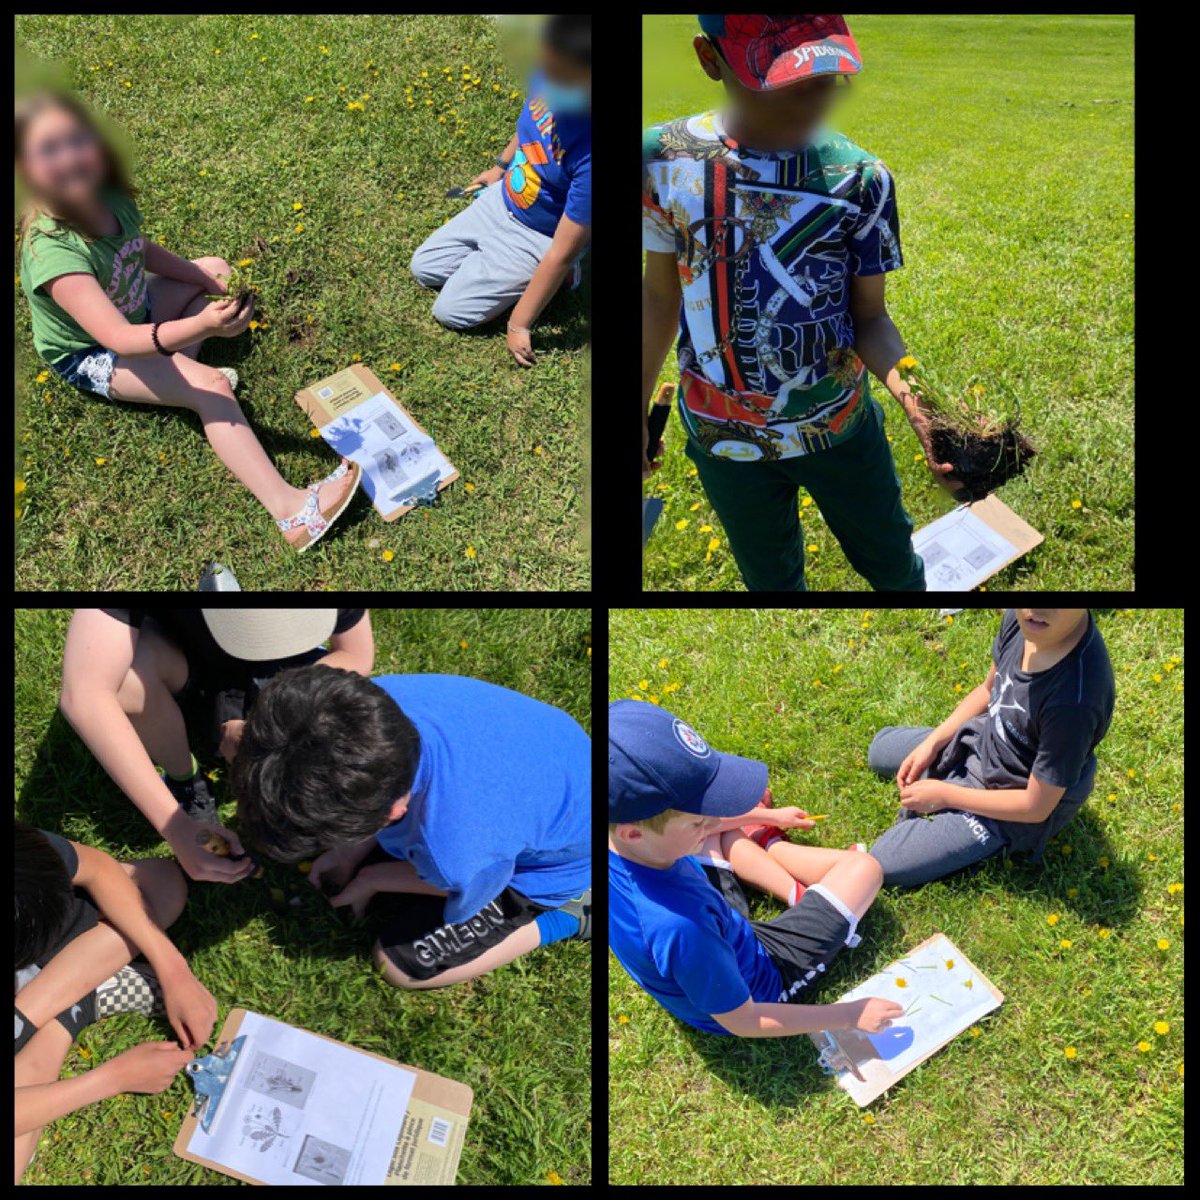 Grade 3 & 5 learning buddies spent time outside today, exploring the structure of plants. We discovered that dandelions have varying root systems! #mentorship #exploration #discovery #enjoyingnature @beg_RETSD @nicoleann4A